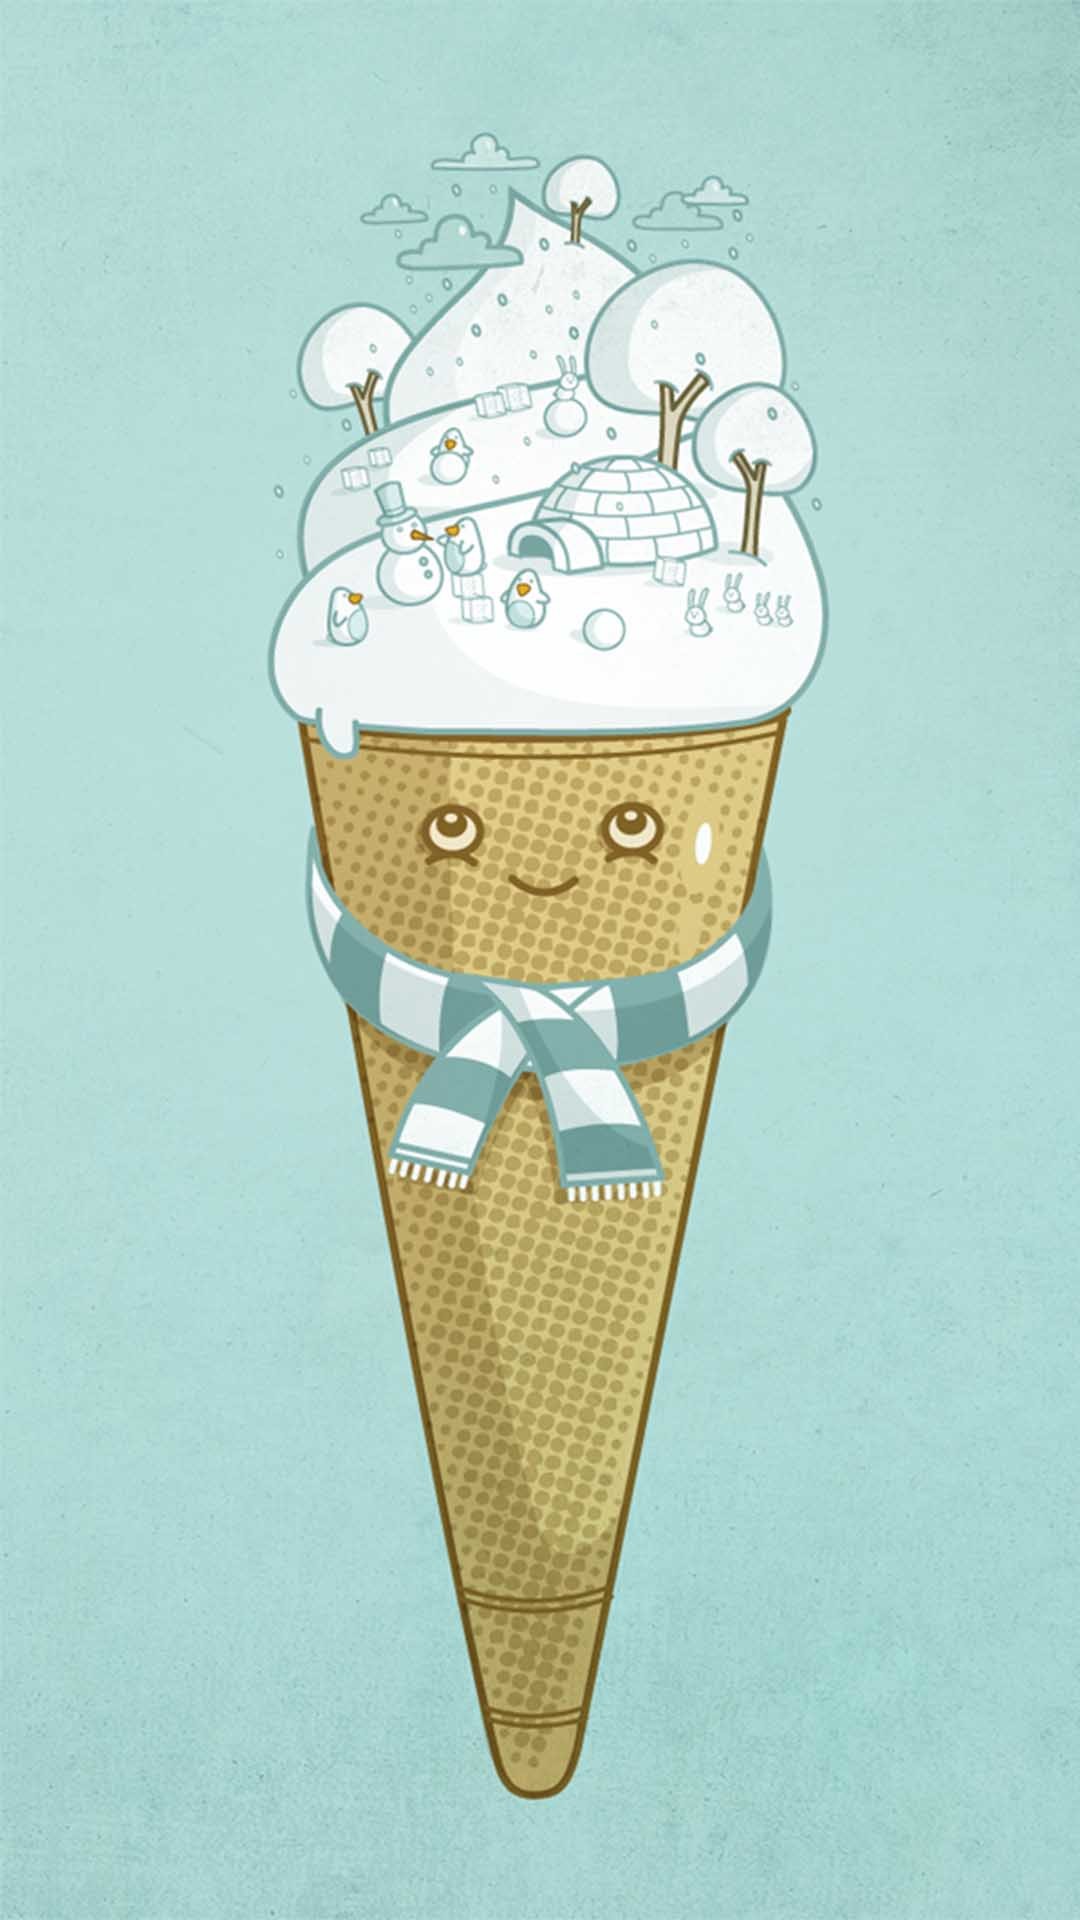 1080x1920 Tap image for more cute funny iPhone wallpaper! Ice cream - @mobile9 |  Wallpapers